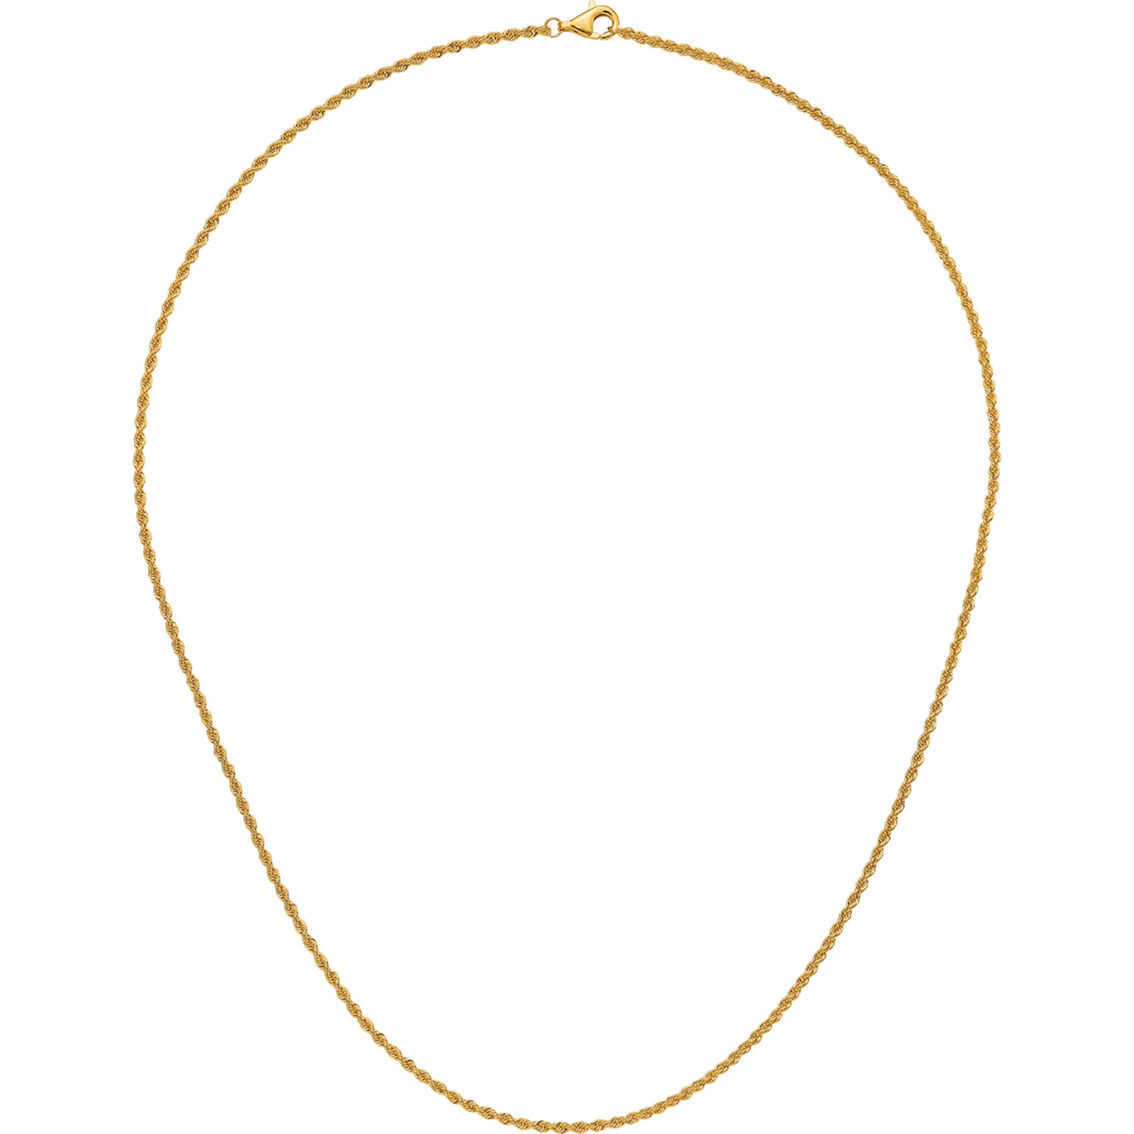 24K Pure Gold 22 in. Rope Chain Necklace - Image 2 of 8